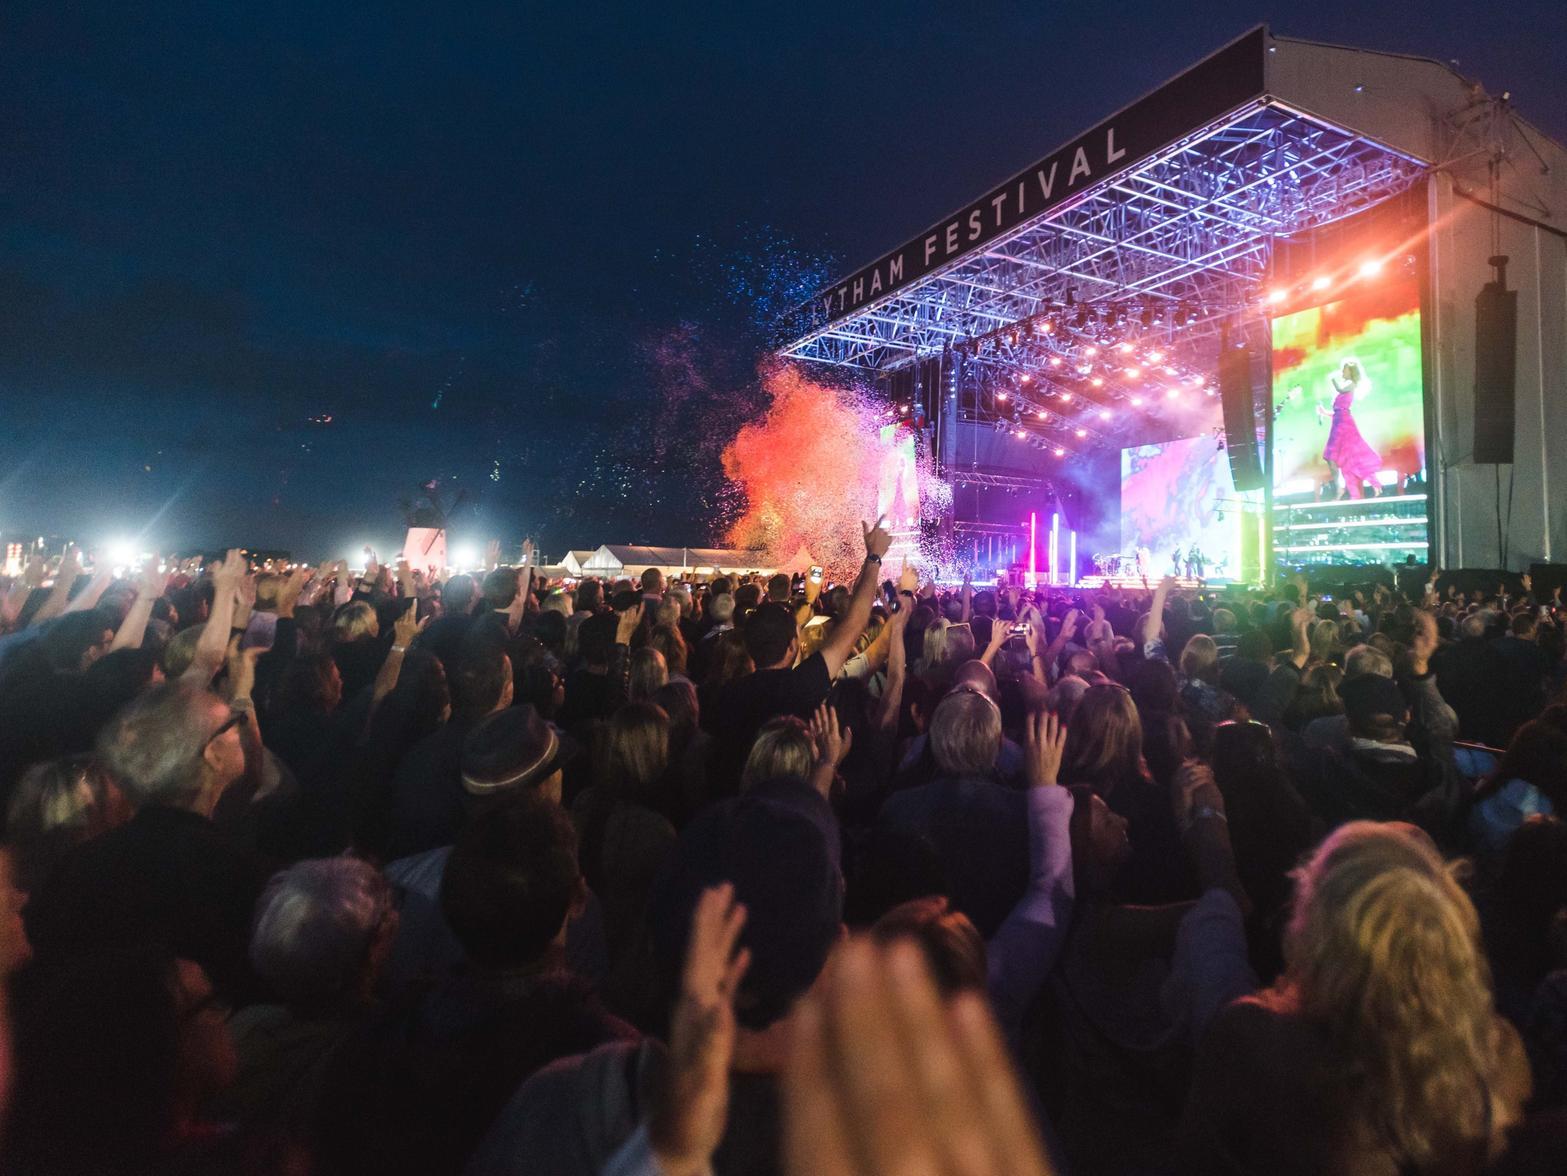 This summer saw Lytham Festival celebrate a decade of music with its most spectacular year to date. Huge acts, including Kylie and Rod Stewart graced the stage, with more than 75,000 fans turning up over the five nights.